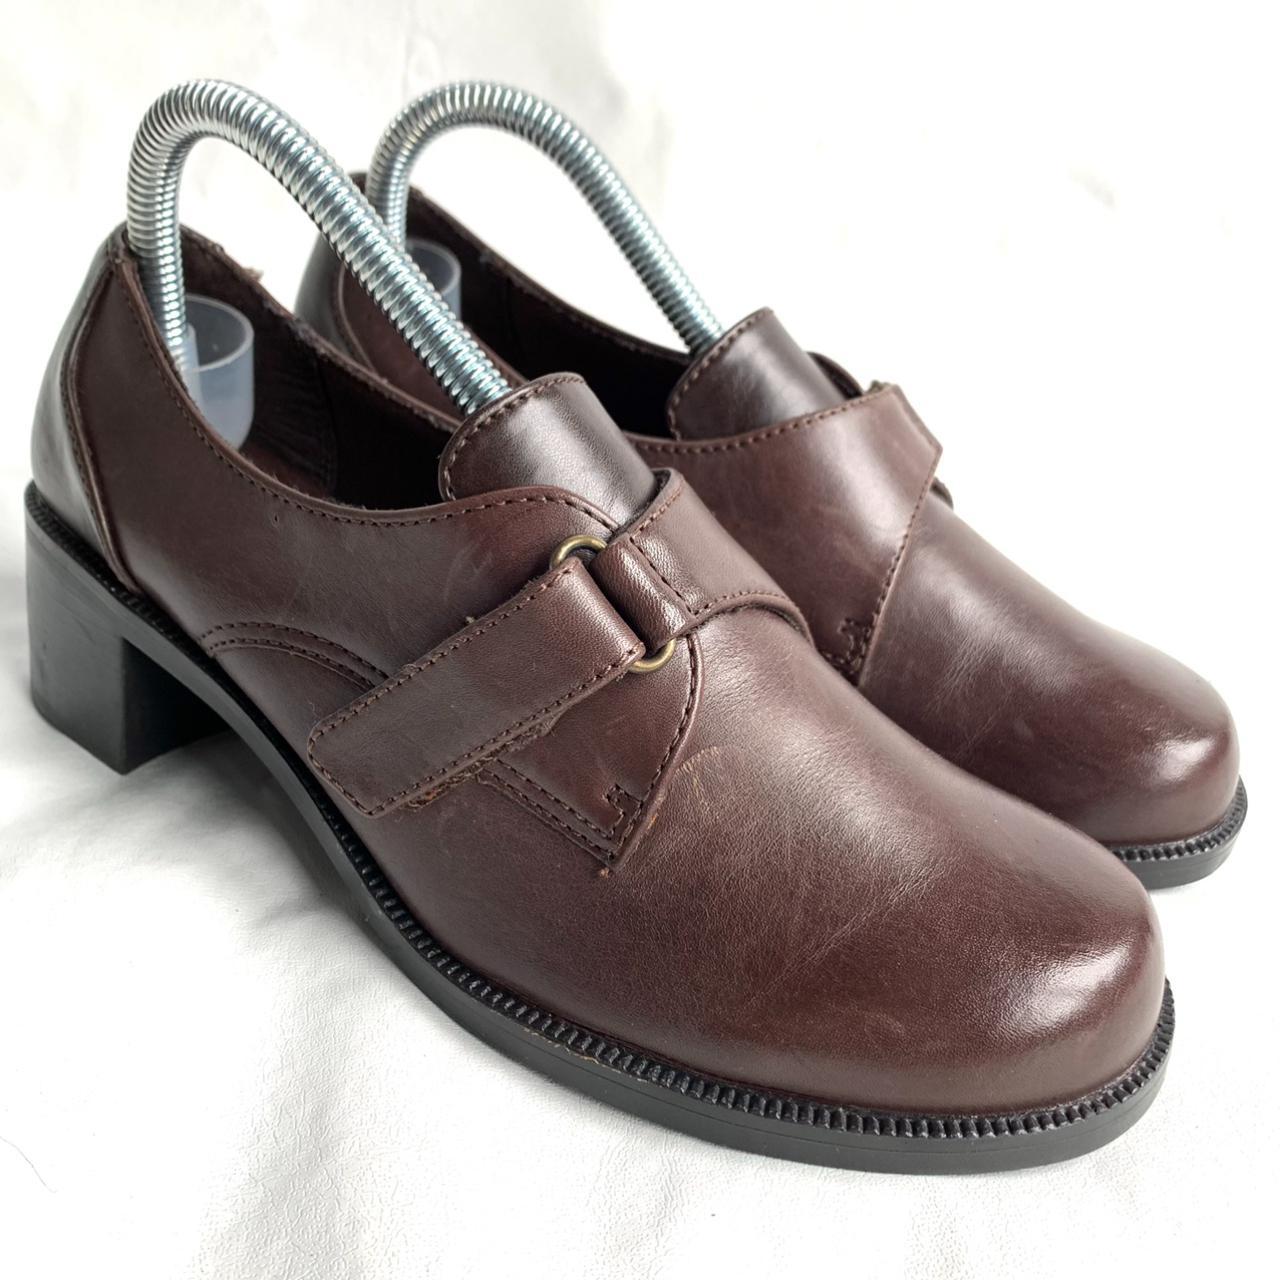 Product Image 1 - Vintage chunky loafers, brown leather,